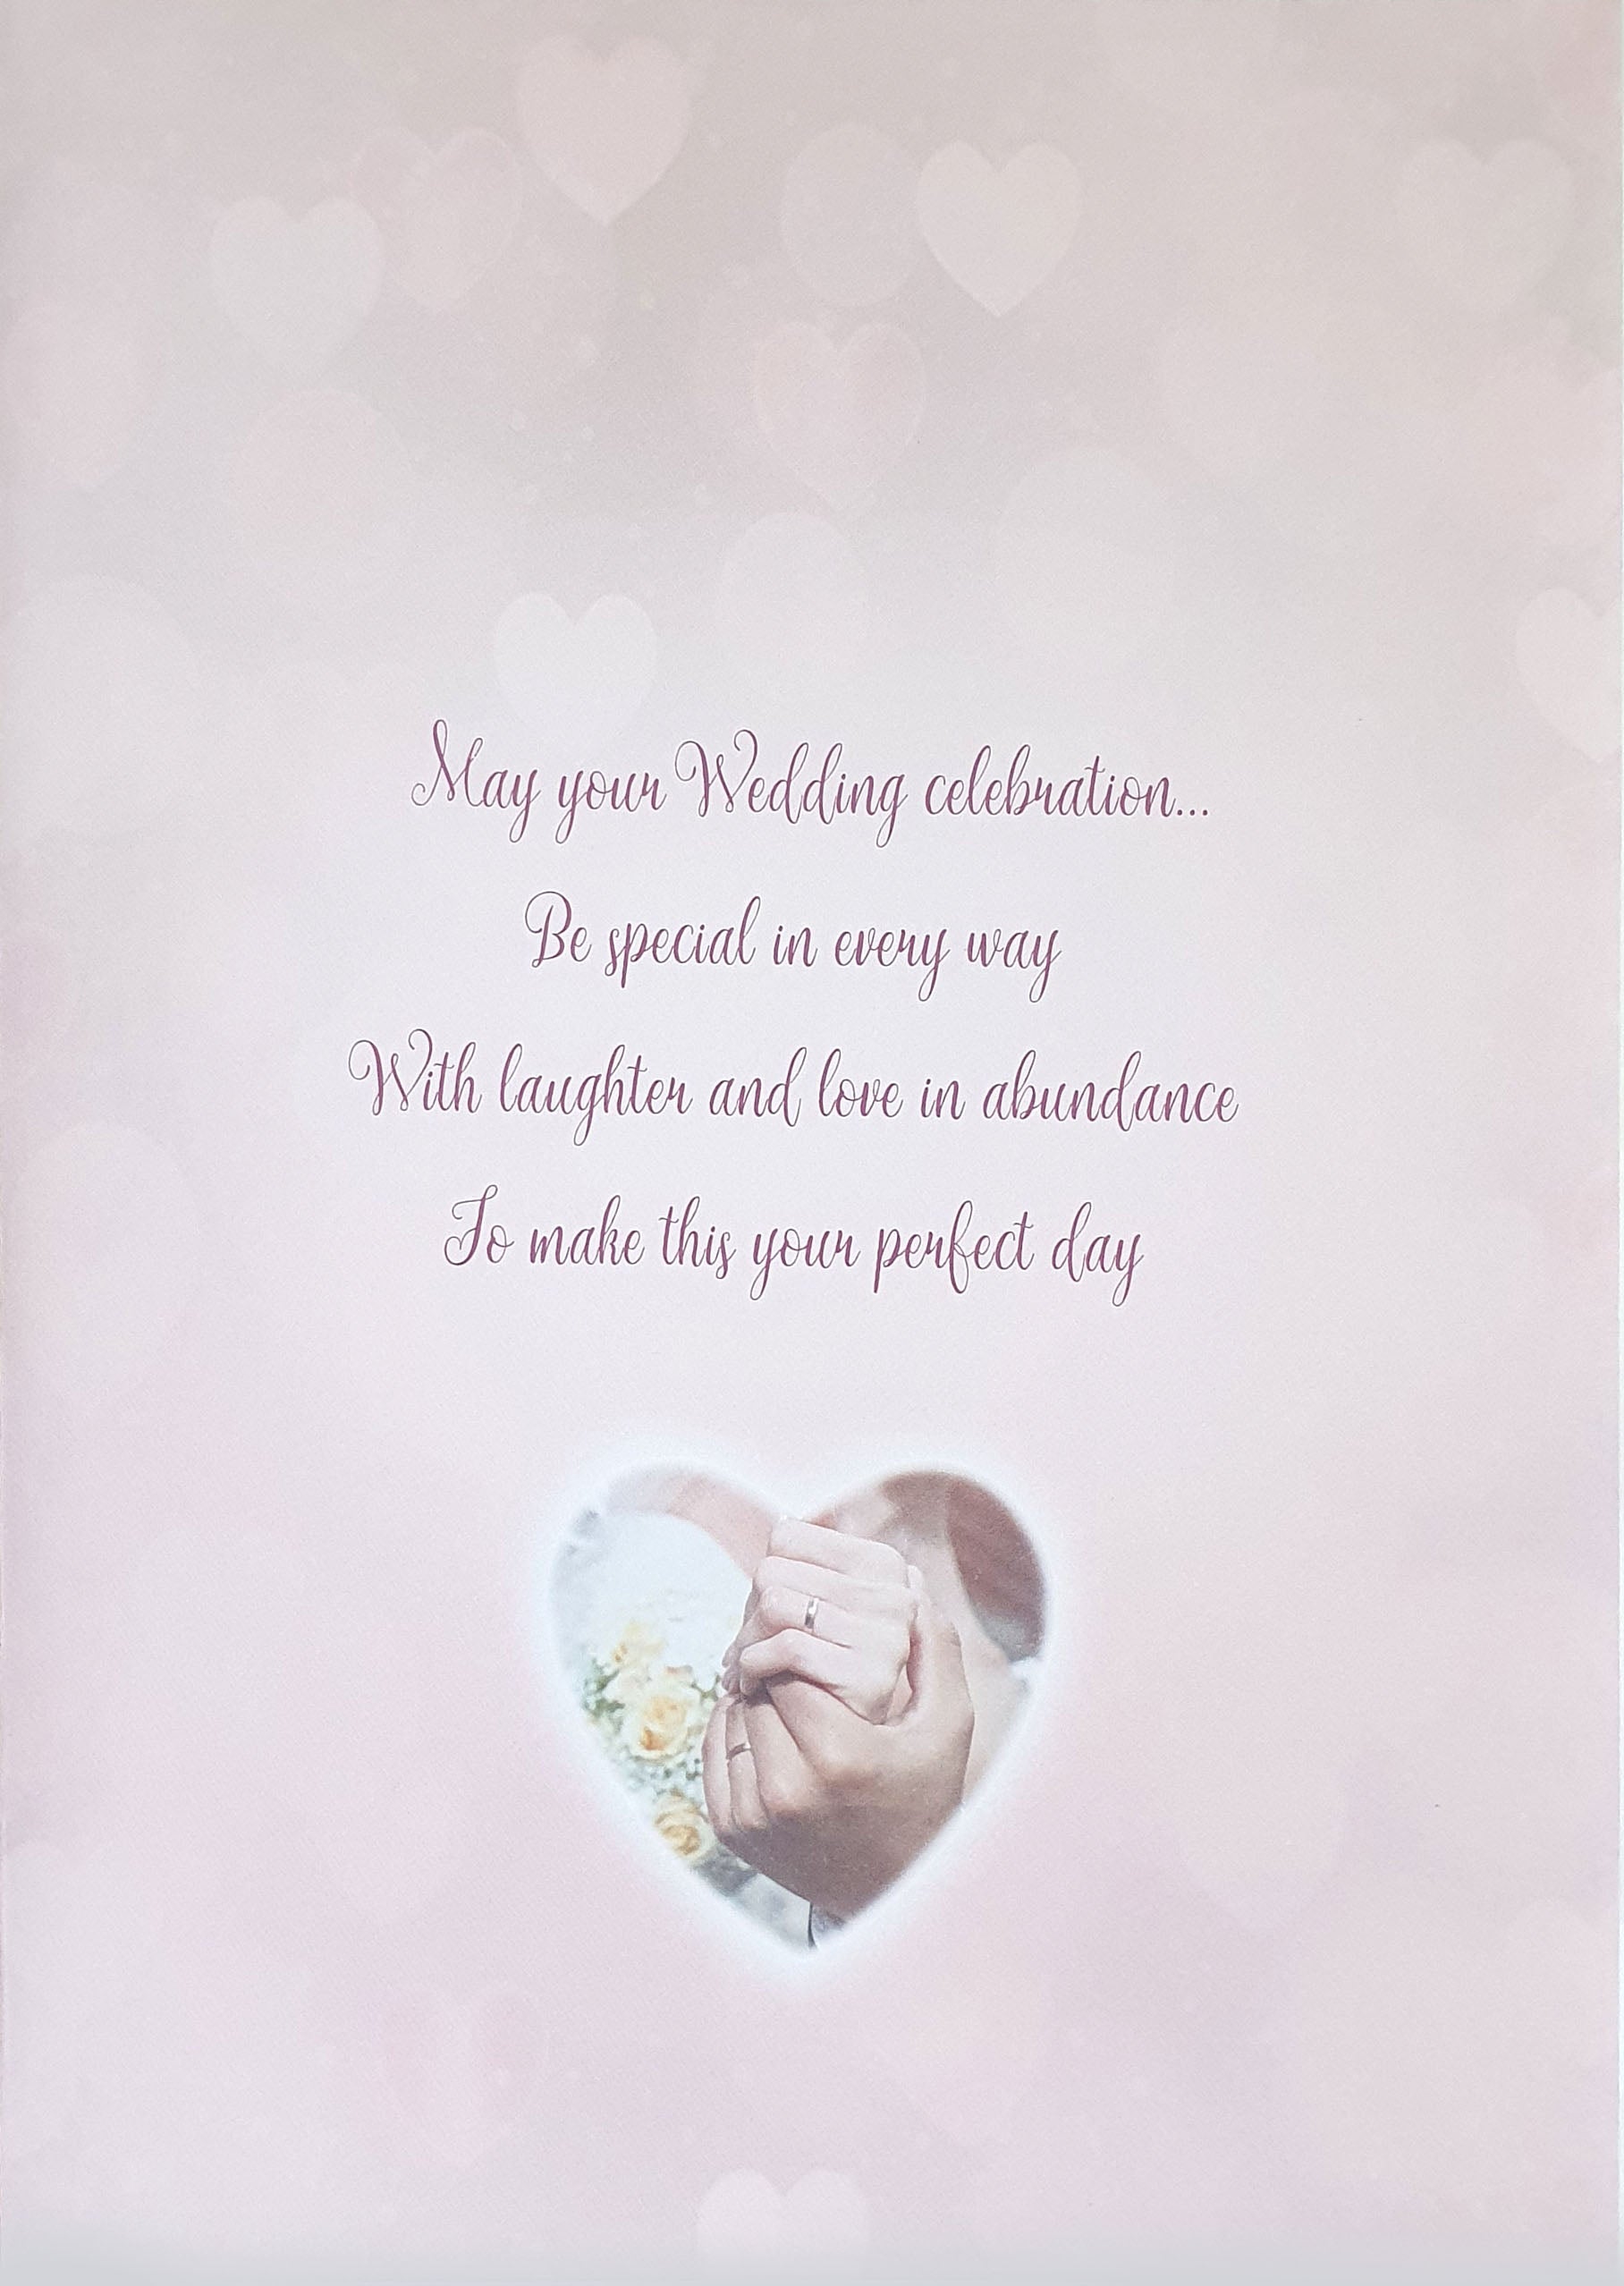 For a Lovely Couple Wedding Day Card